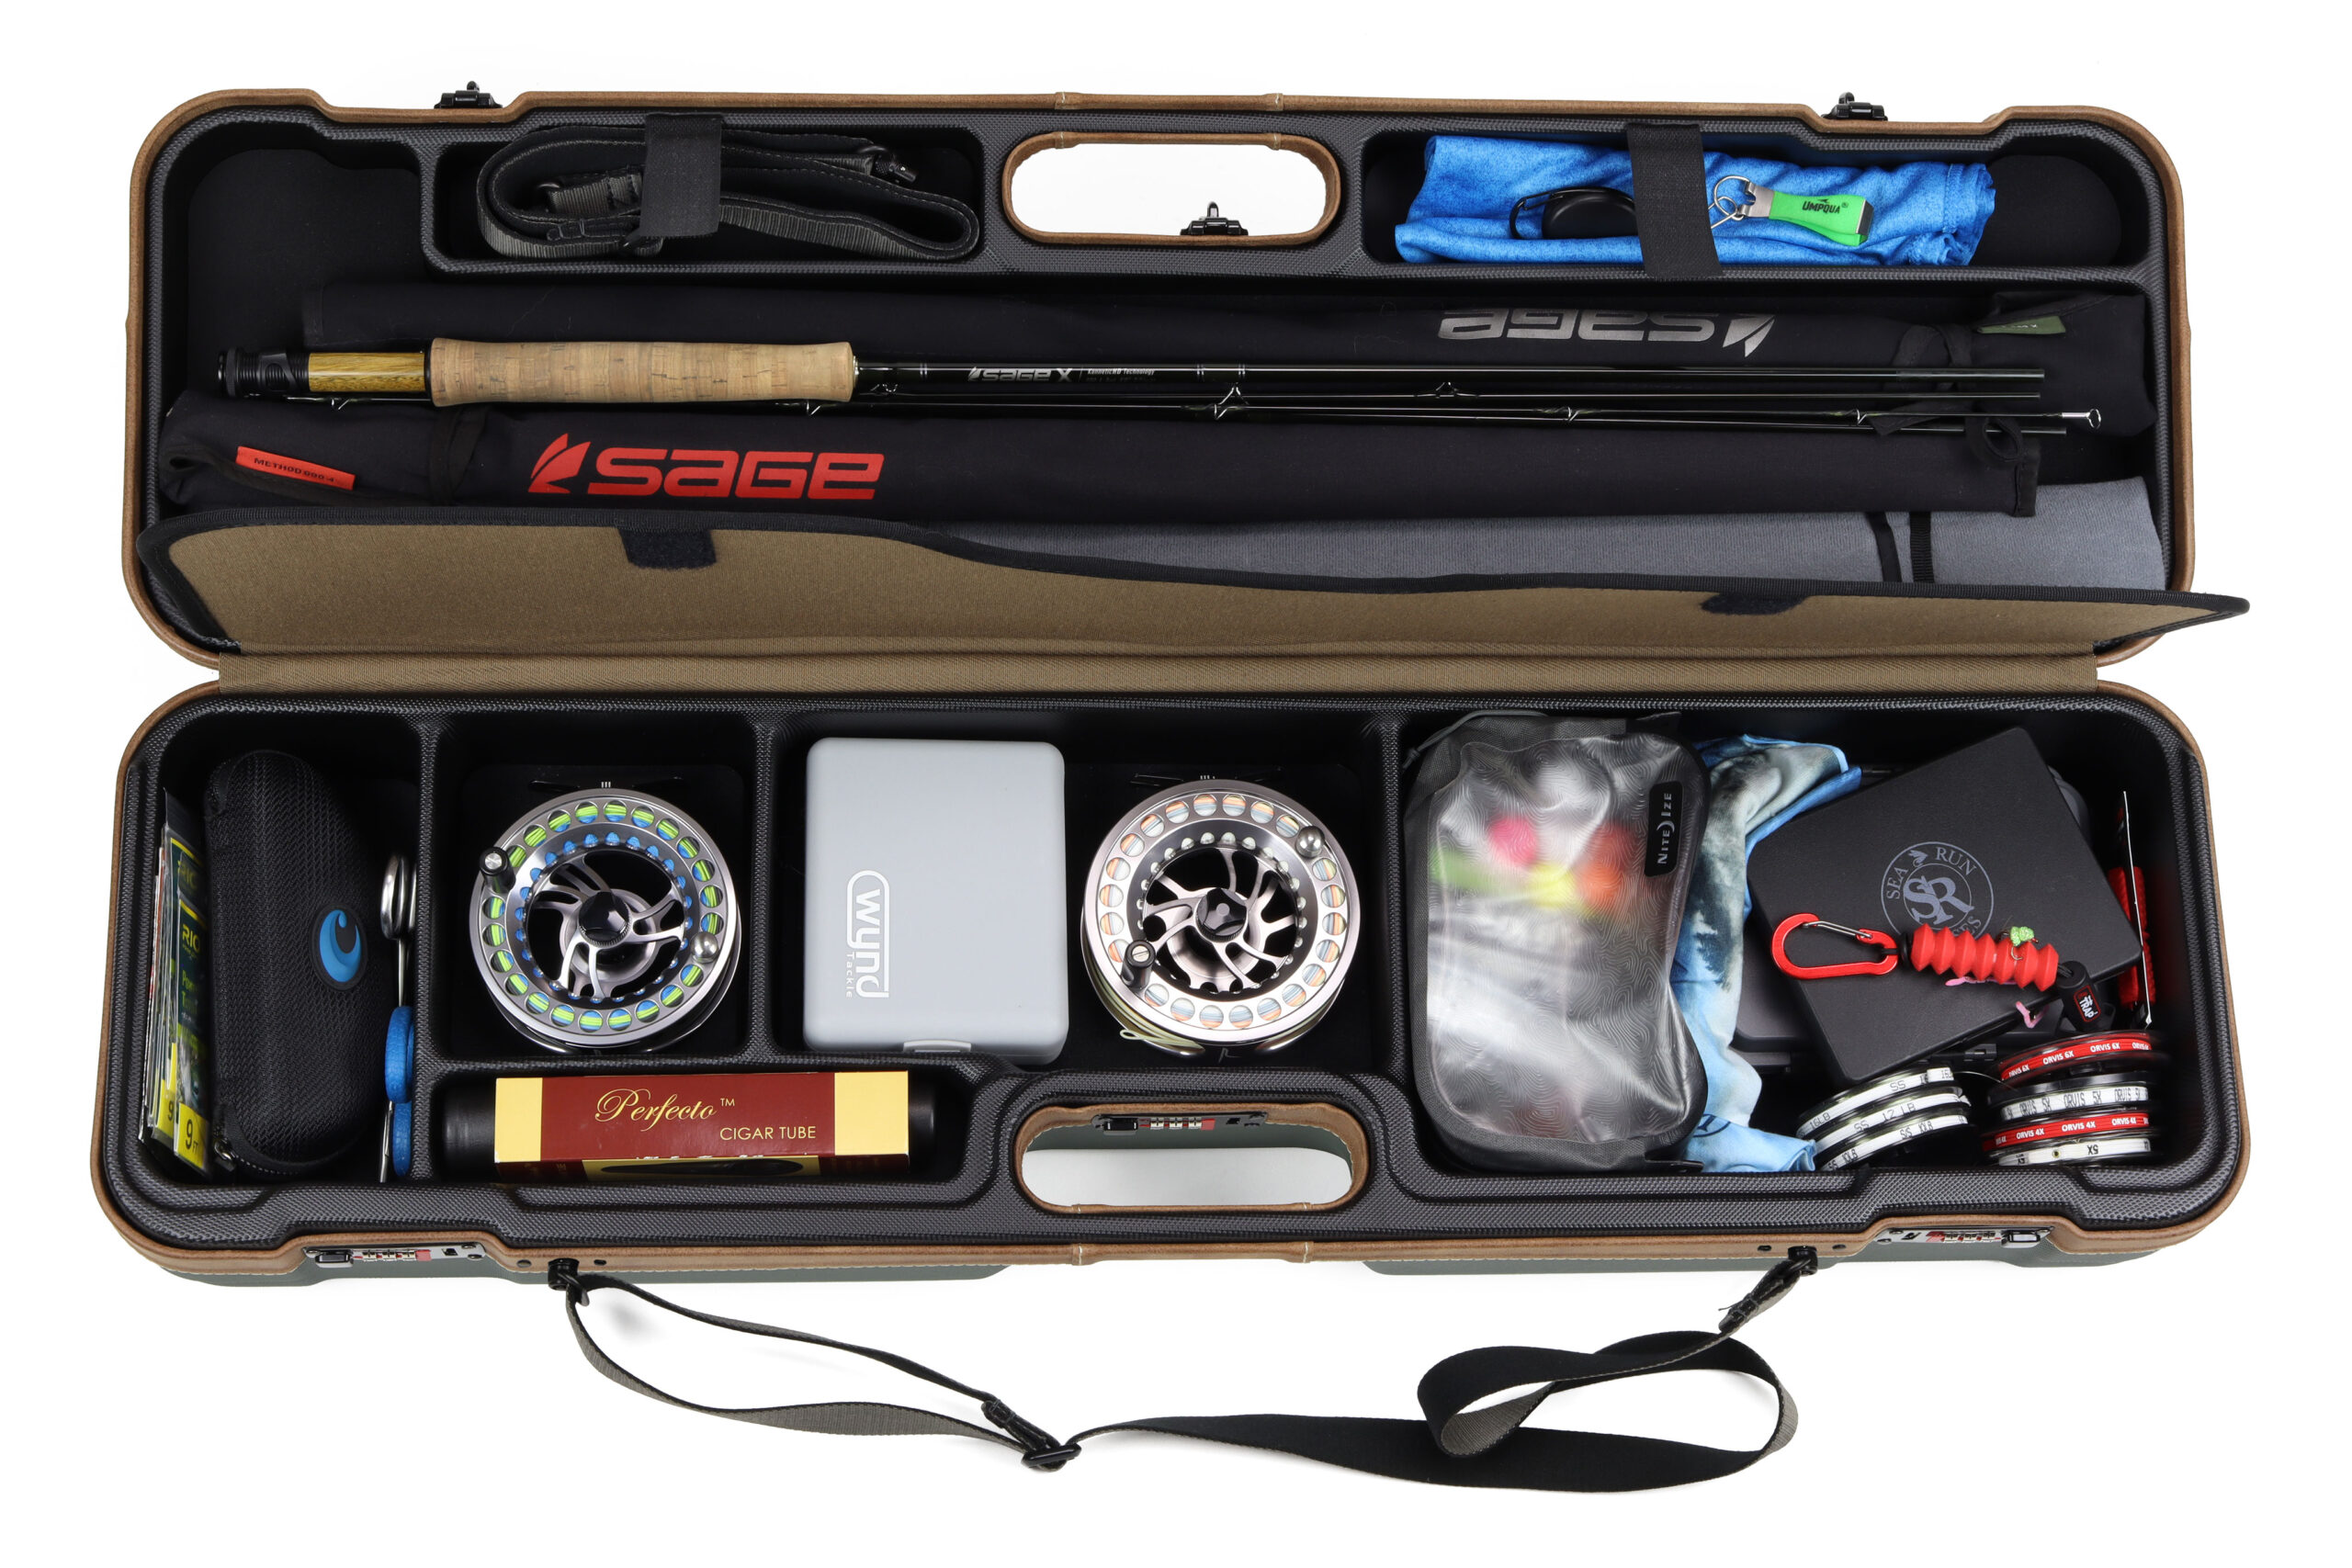 Norfork Classic QR Expedition Fly Fishing Rod and Reel Travel Case - 9' 6 Rod